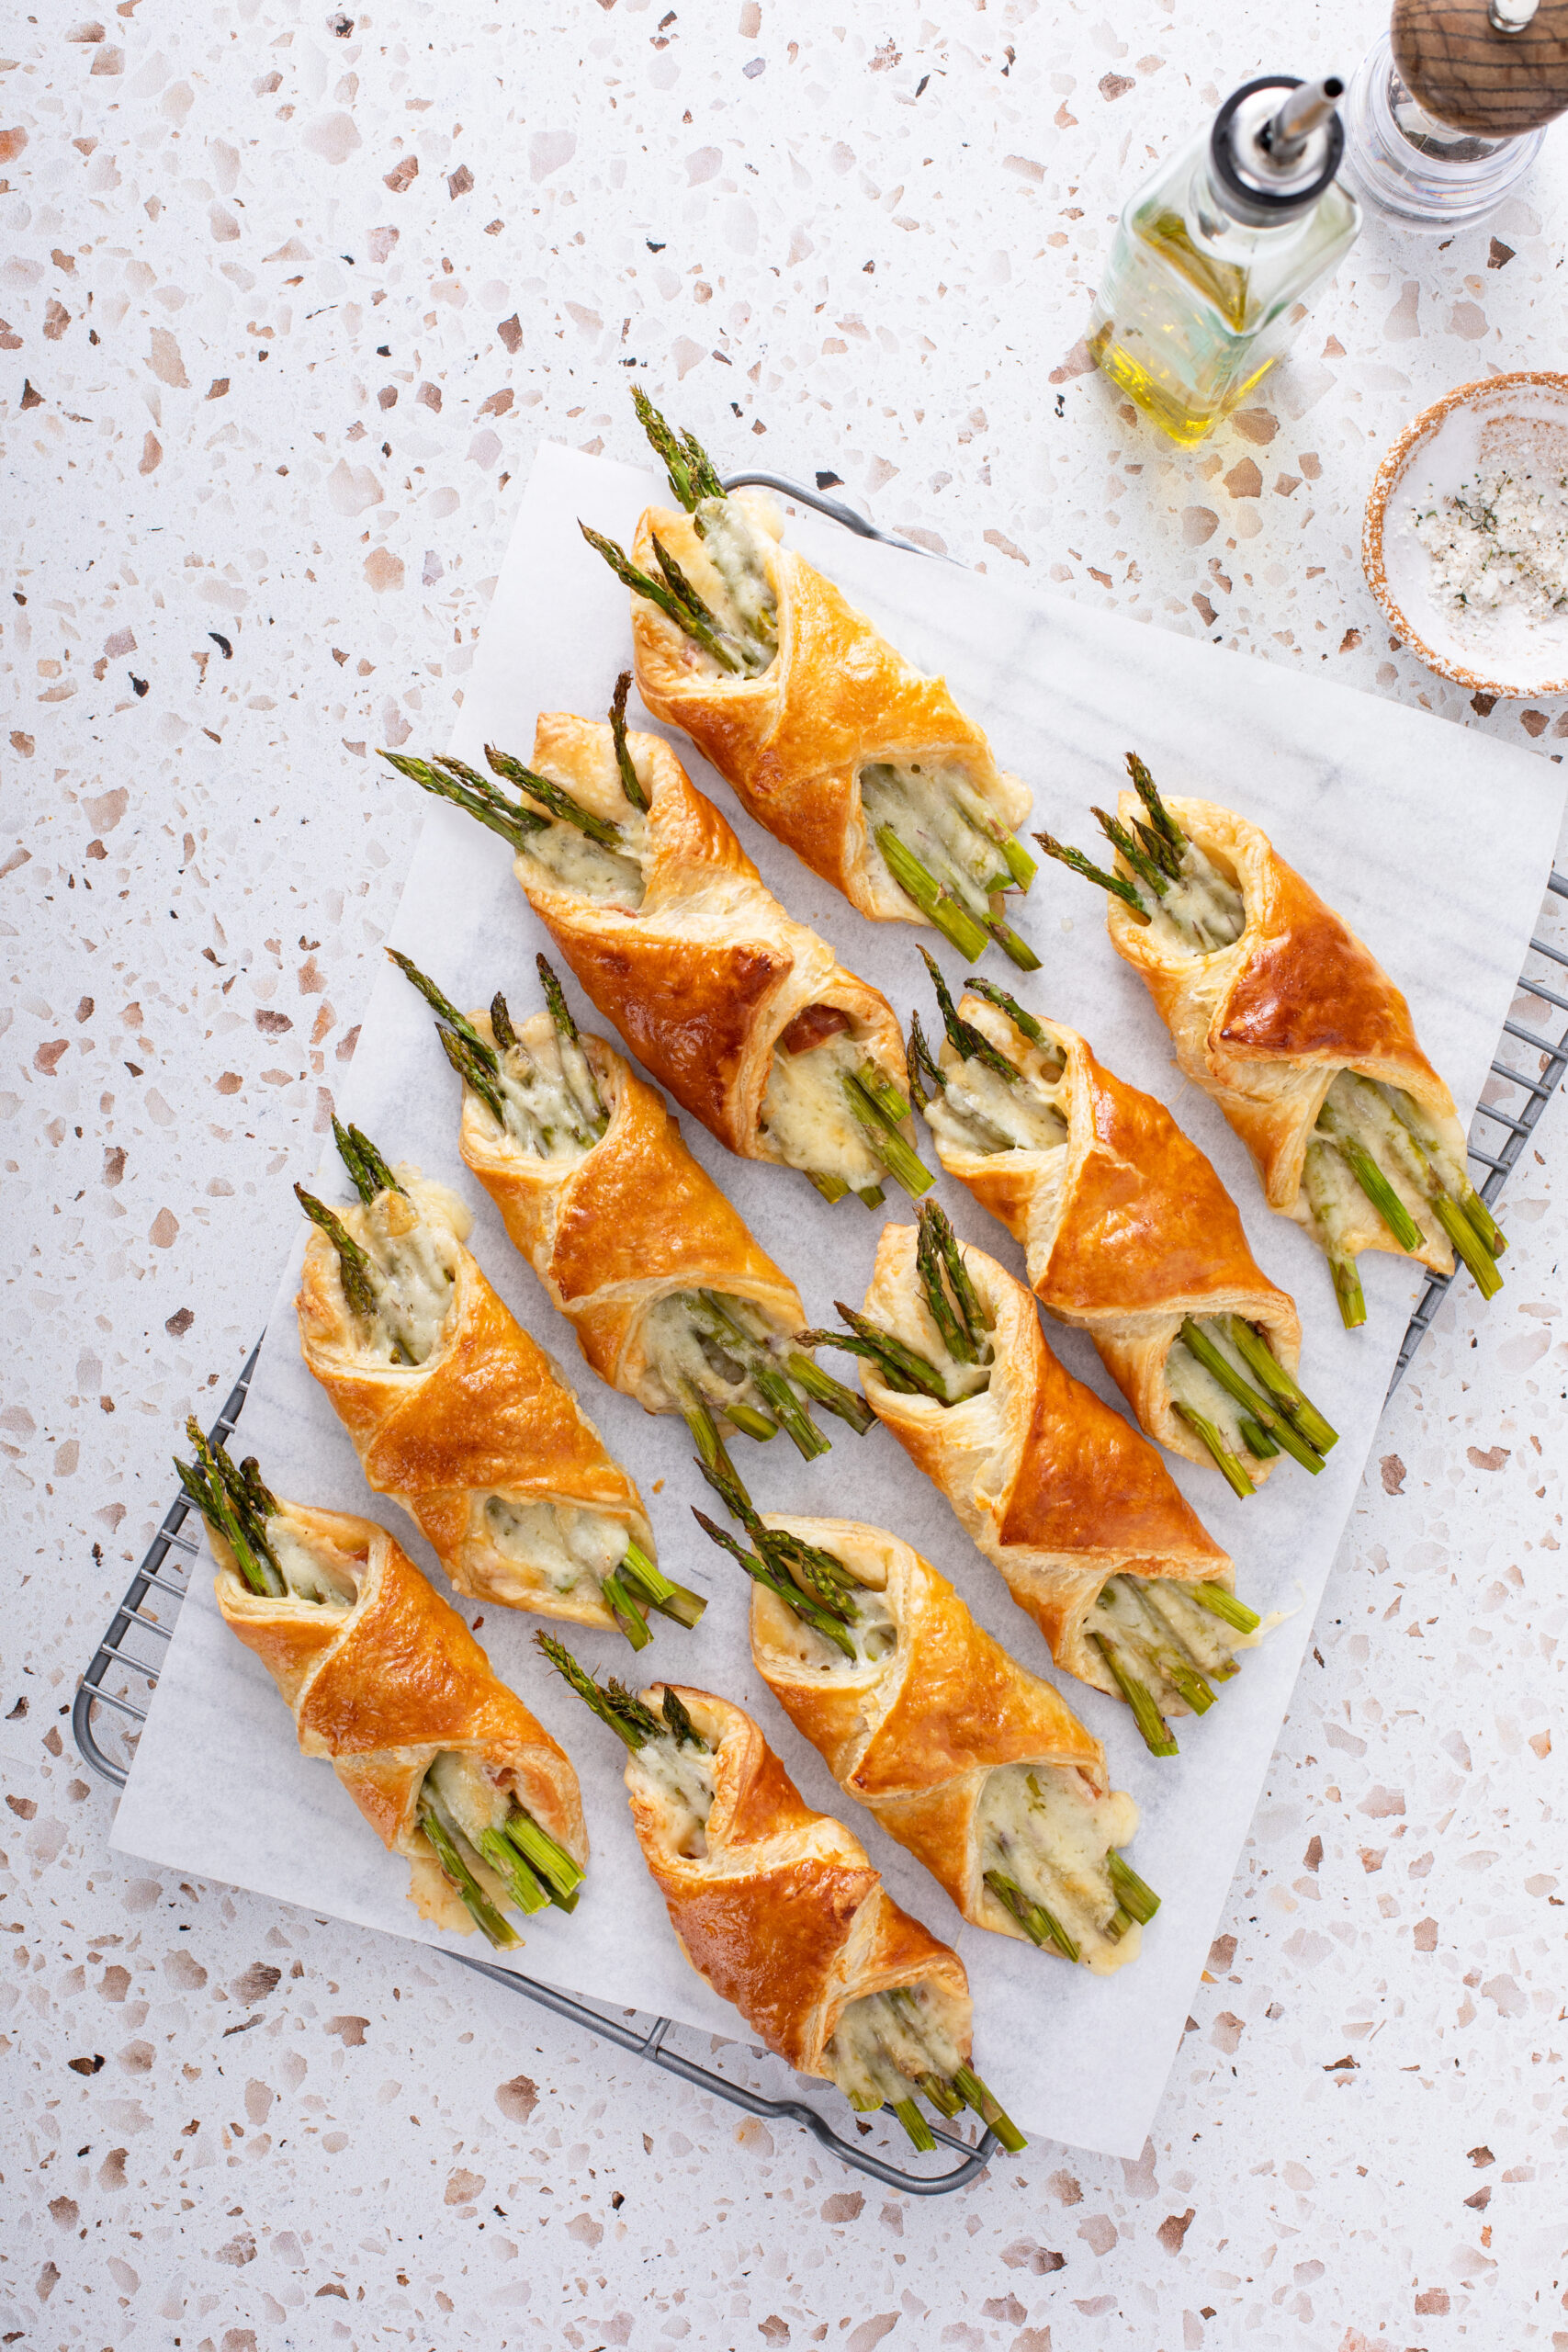 Looking for the most delicious appetizer to pair with your favorite glass of Chardonnay? Click HERE to make this recipe ASAP! 